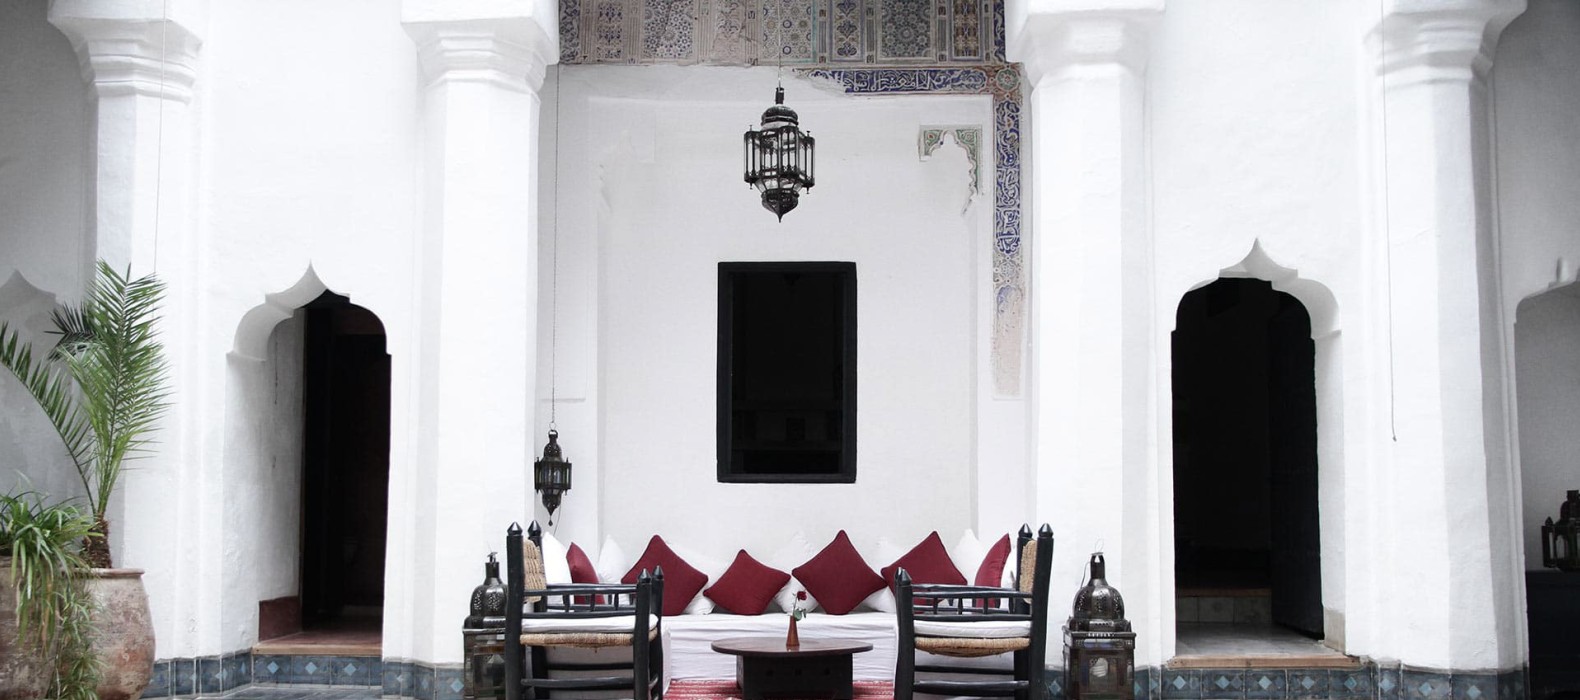 Entrance Hall view of Riad Knizou in Marrakech